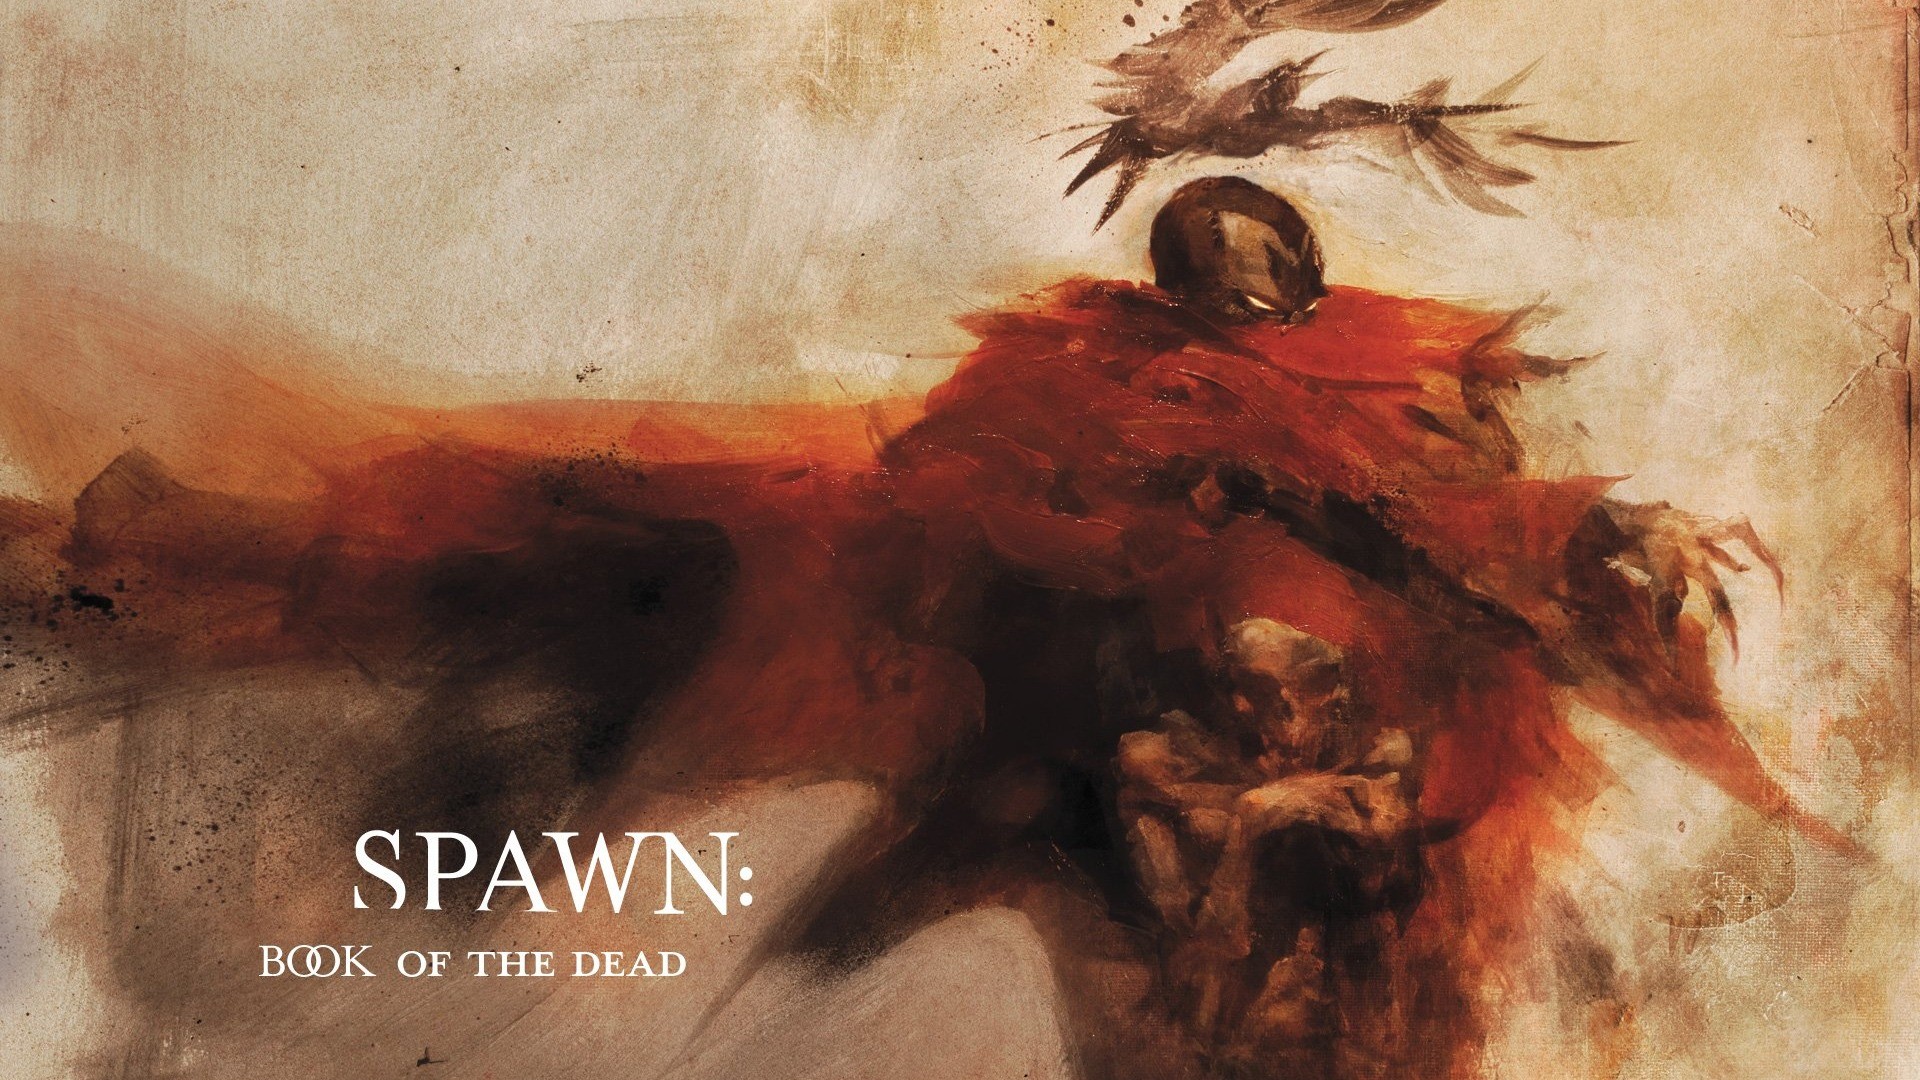 1920x1080 Spawn HD Wallpapers #2 - .